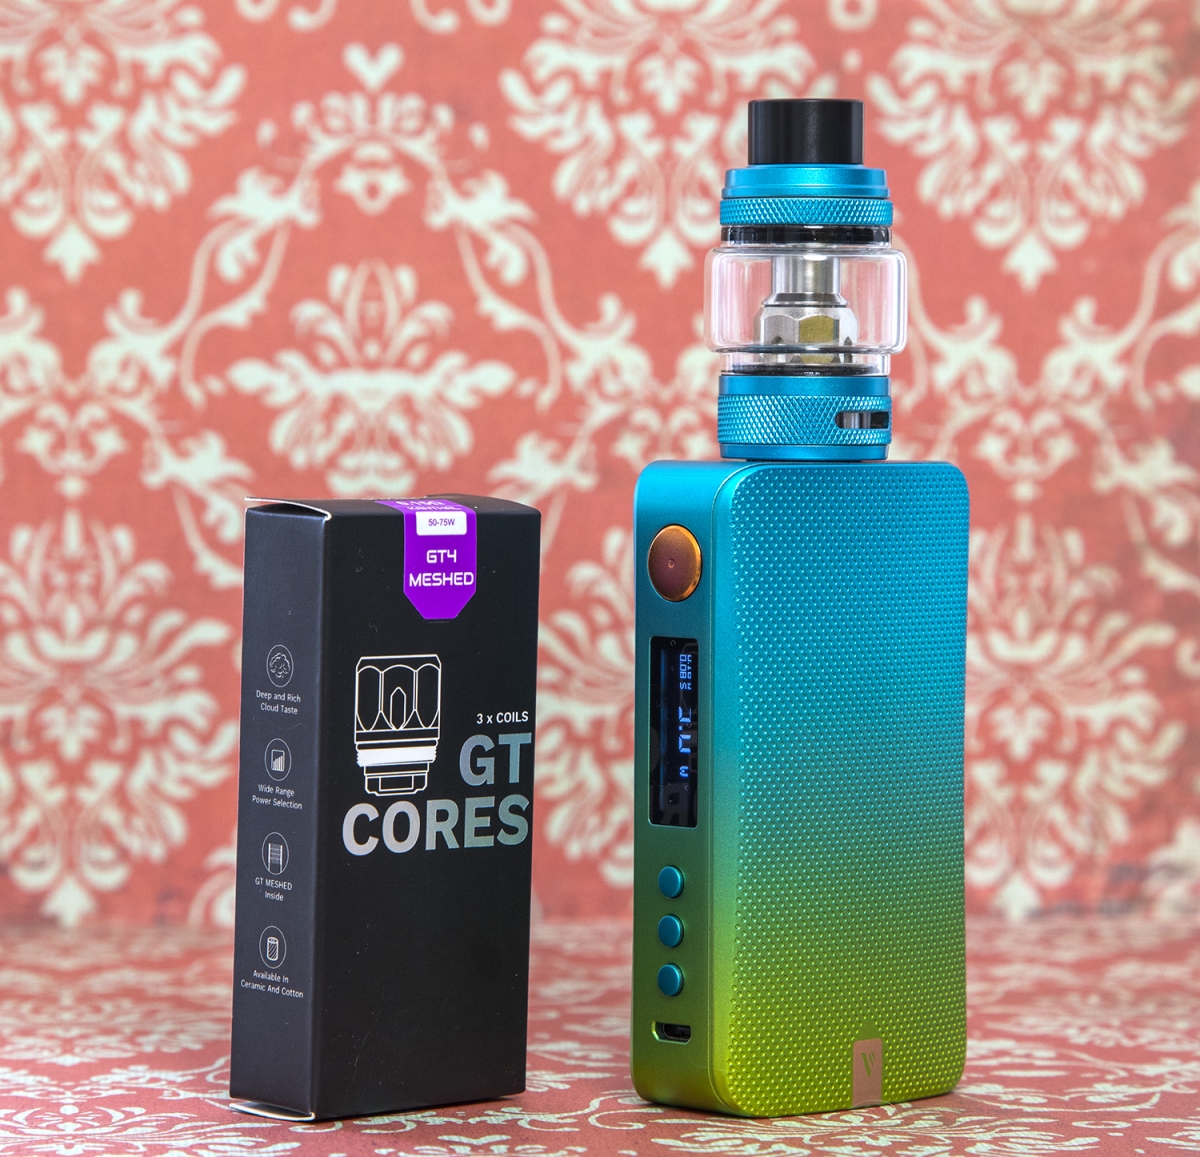 Vaporesso Gen S and NRG Tank Kit with spare coils